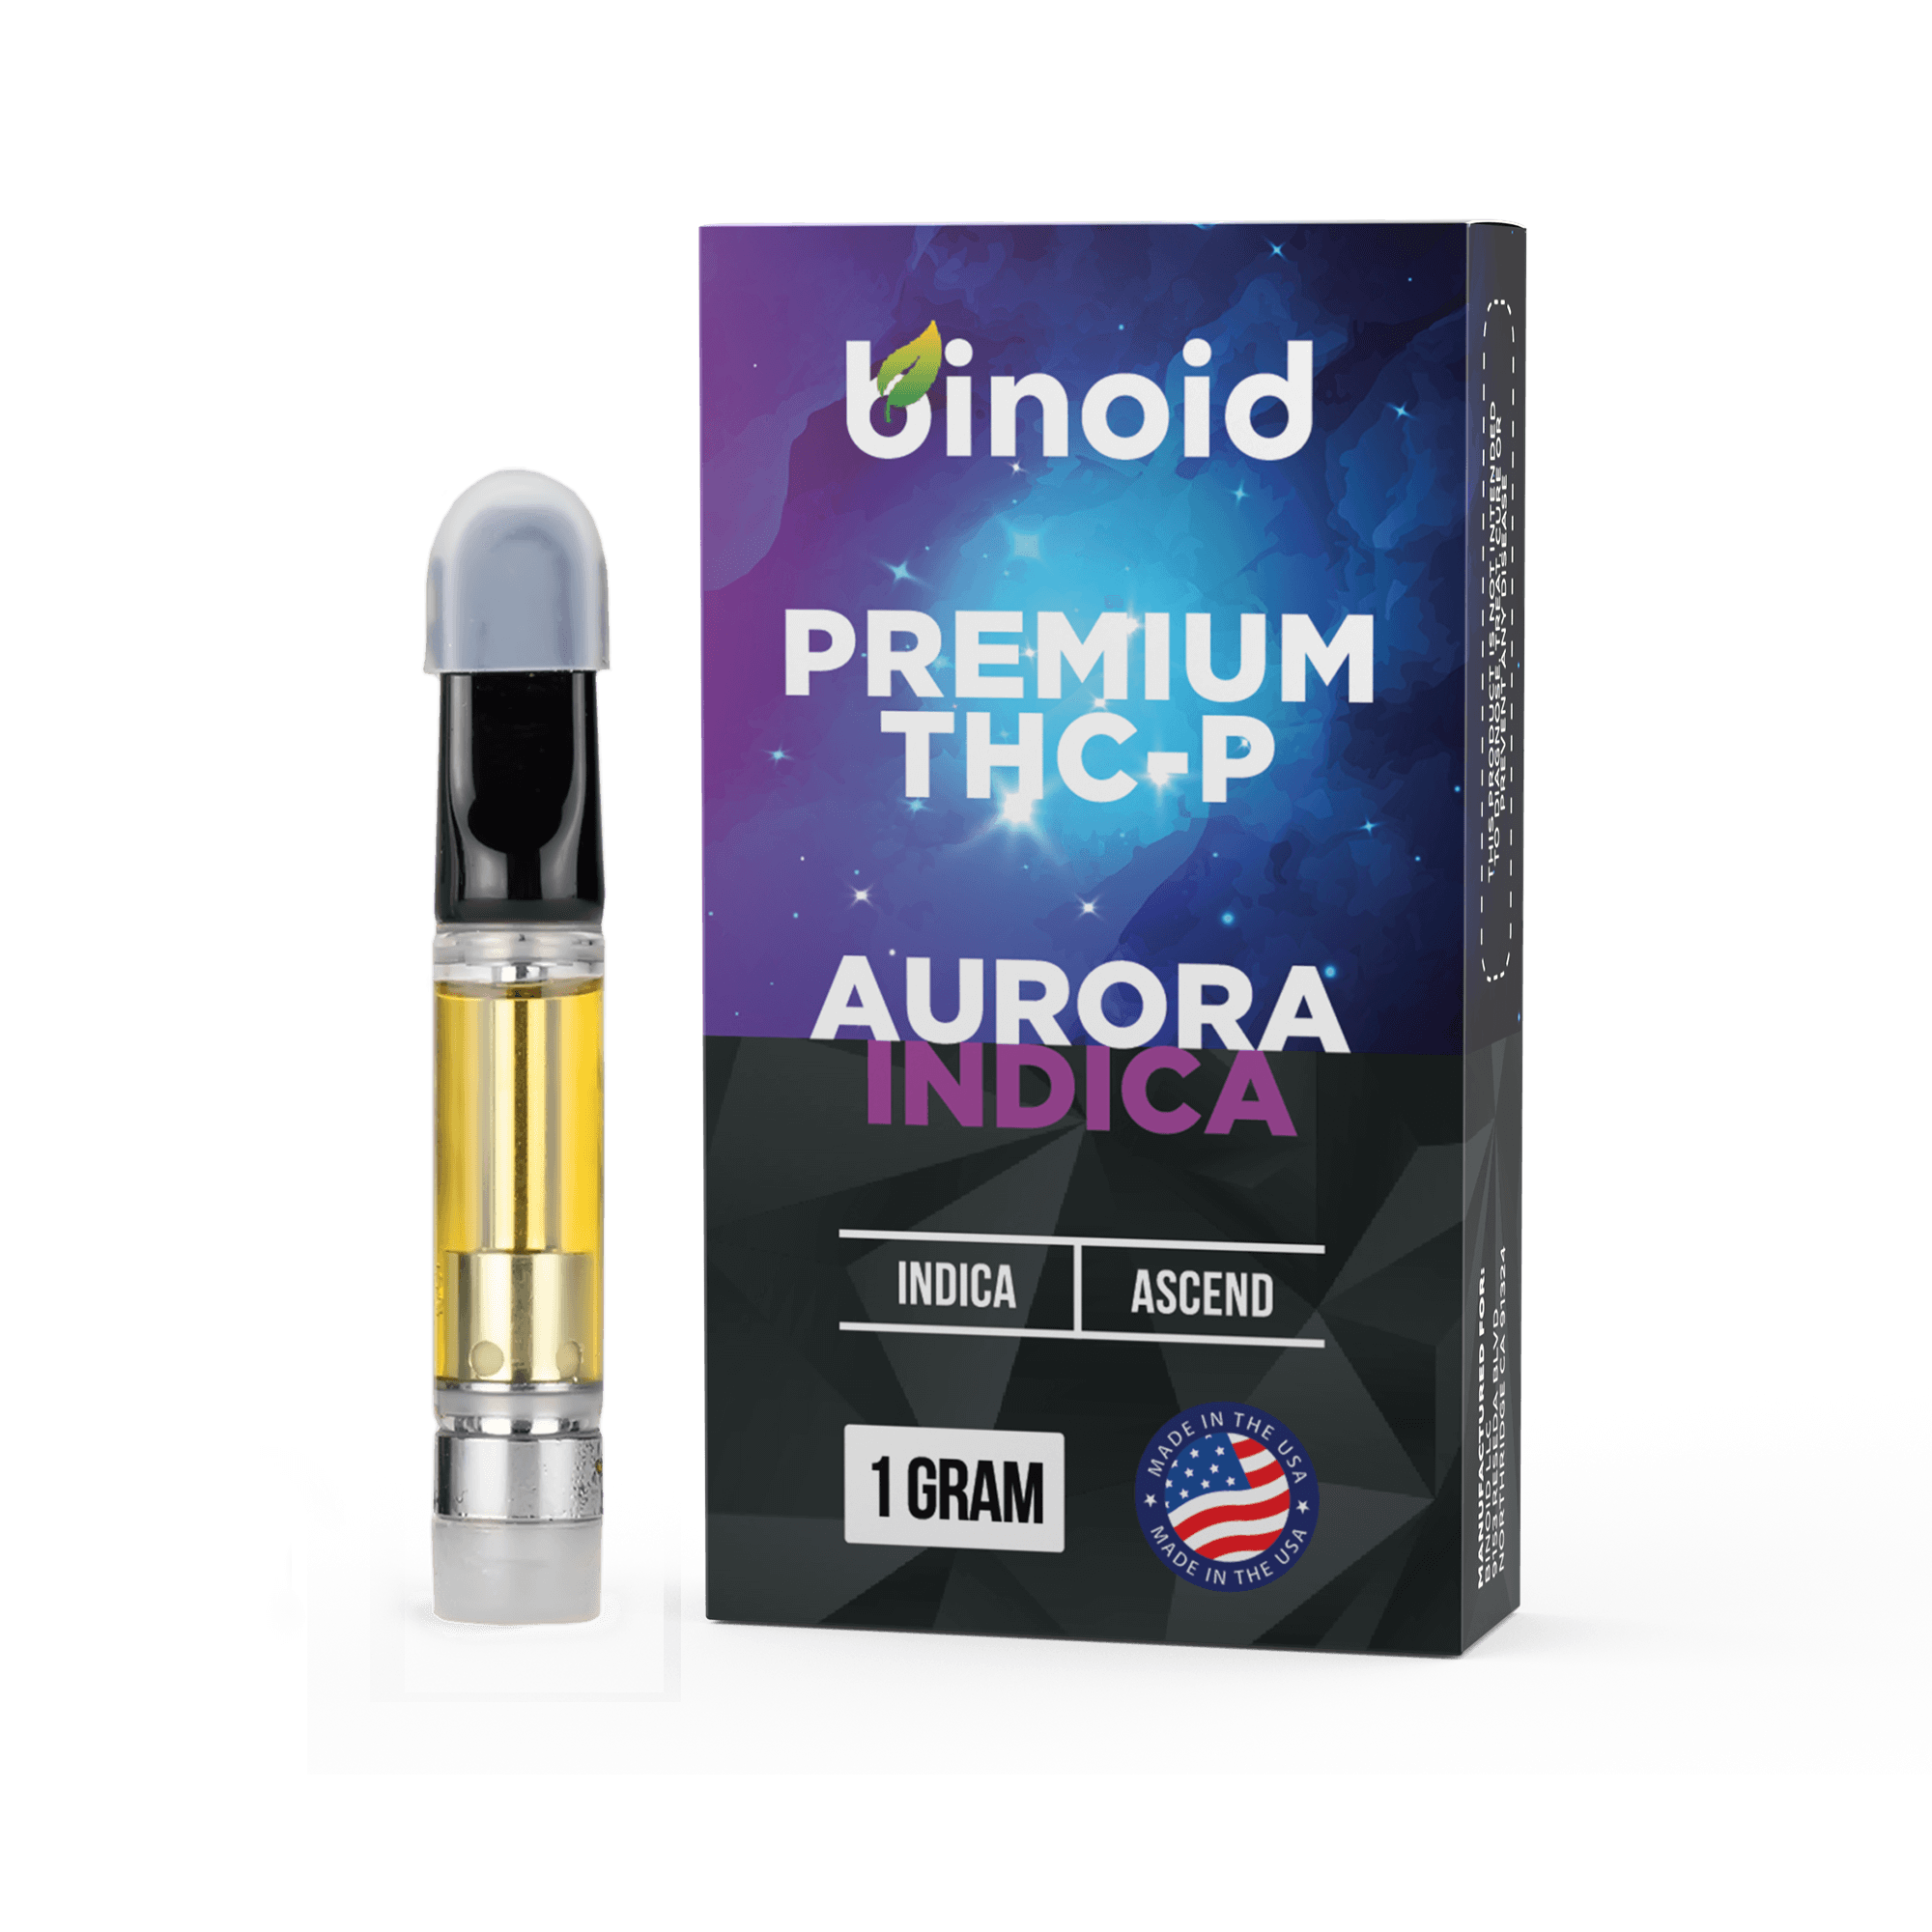 https://www.binoidcbd.com/wp-content/uploads/2023/01/products-THCP-Vape-For-Pain-Anxiety-Sleep-Insomnia-Back-Neck-Nerve-Where-To-Get-Aurora-Indica_40e76325-0434-485b-981e-e557fa1e97f8.png